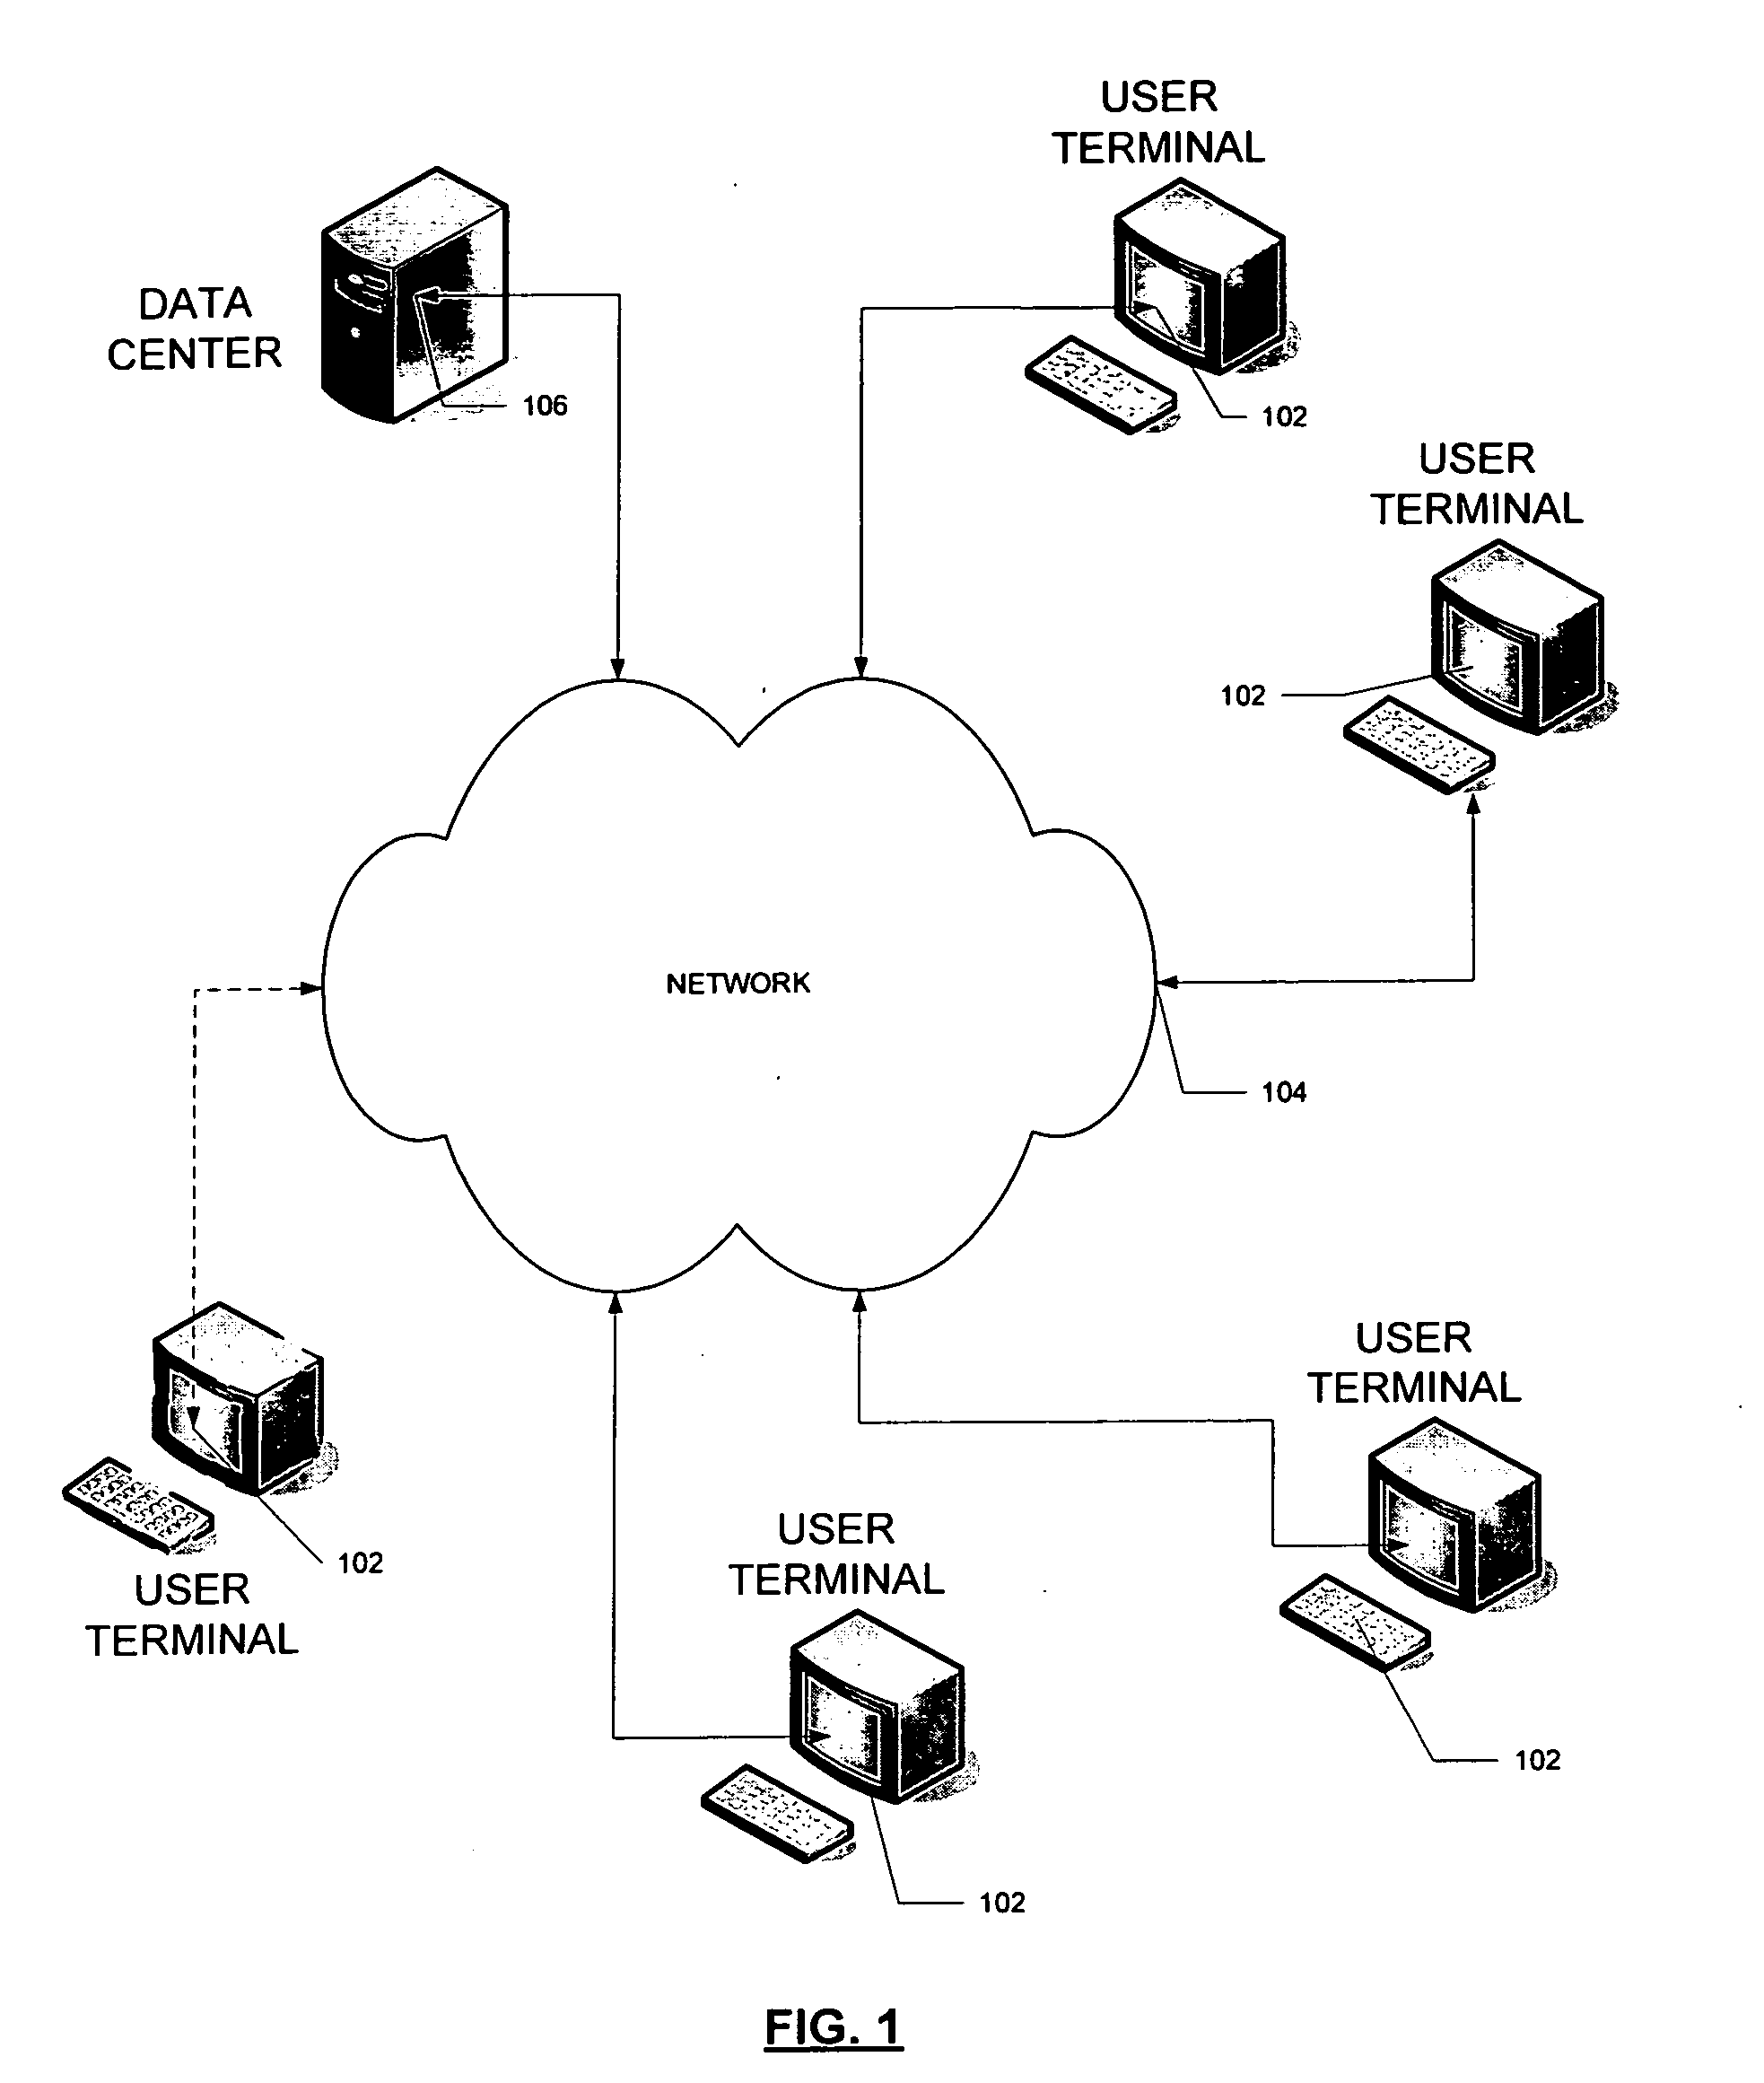 Controlled deployment of software in a web-based architecture